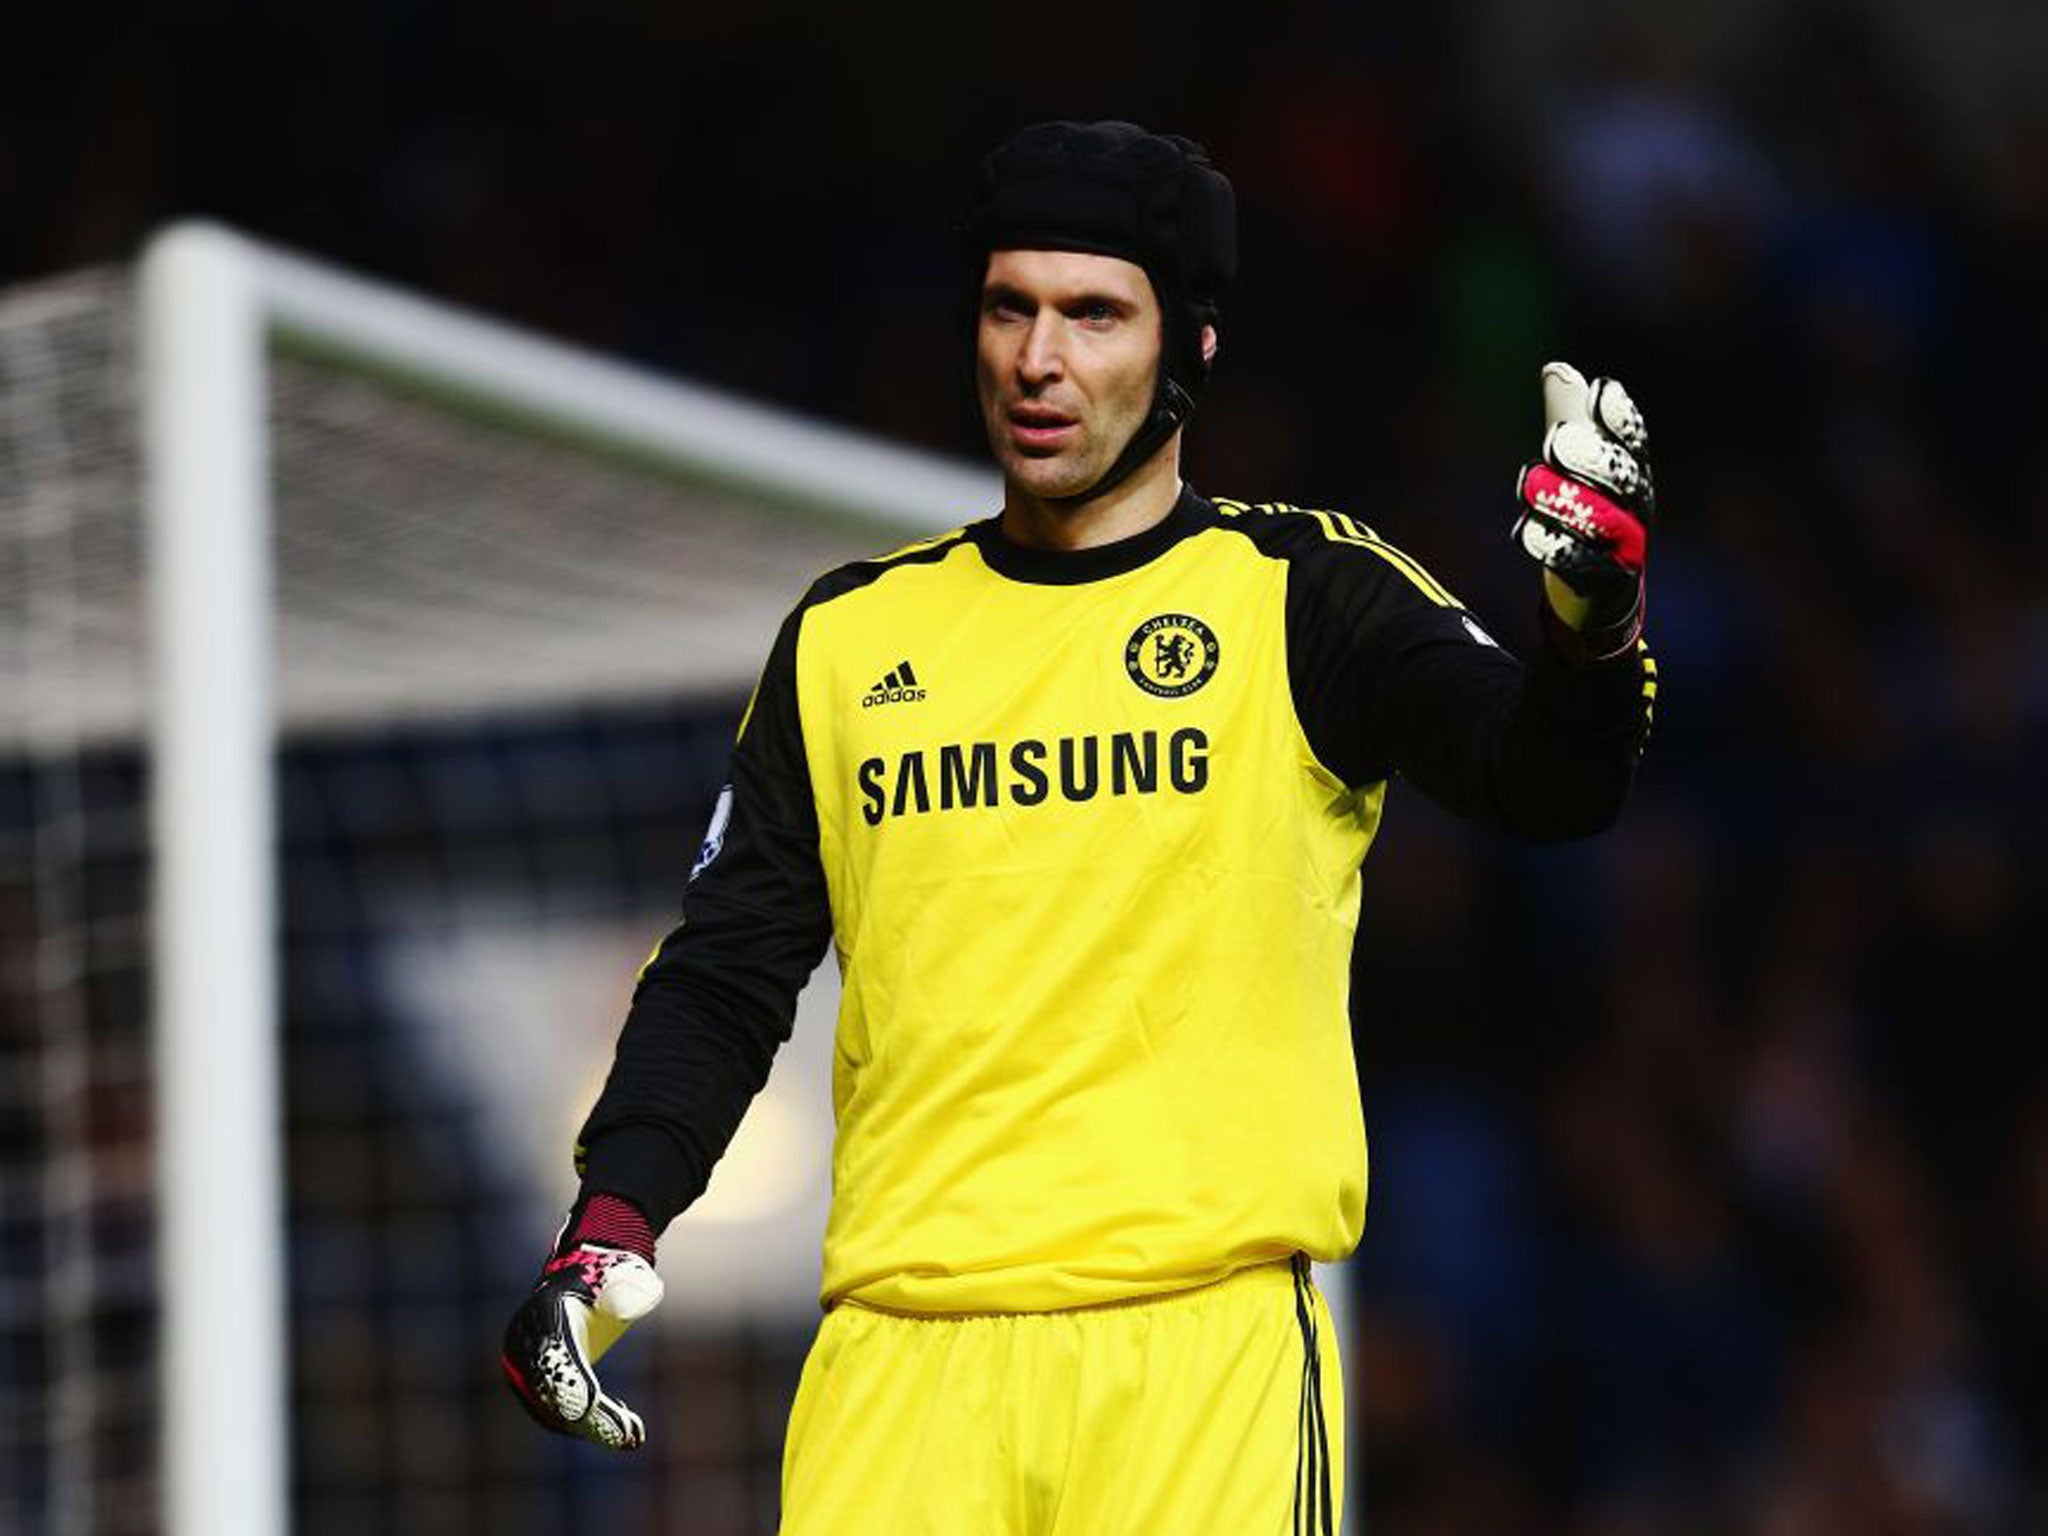 Petr Cech said there were no points for style in the league